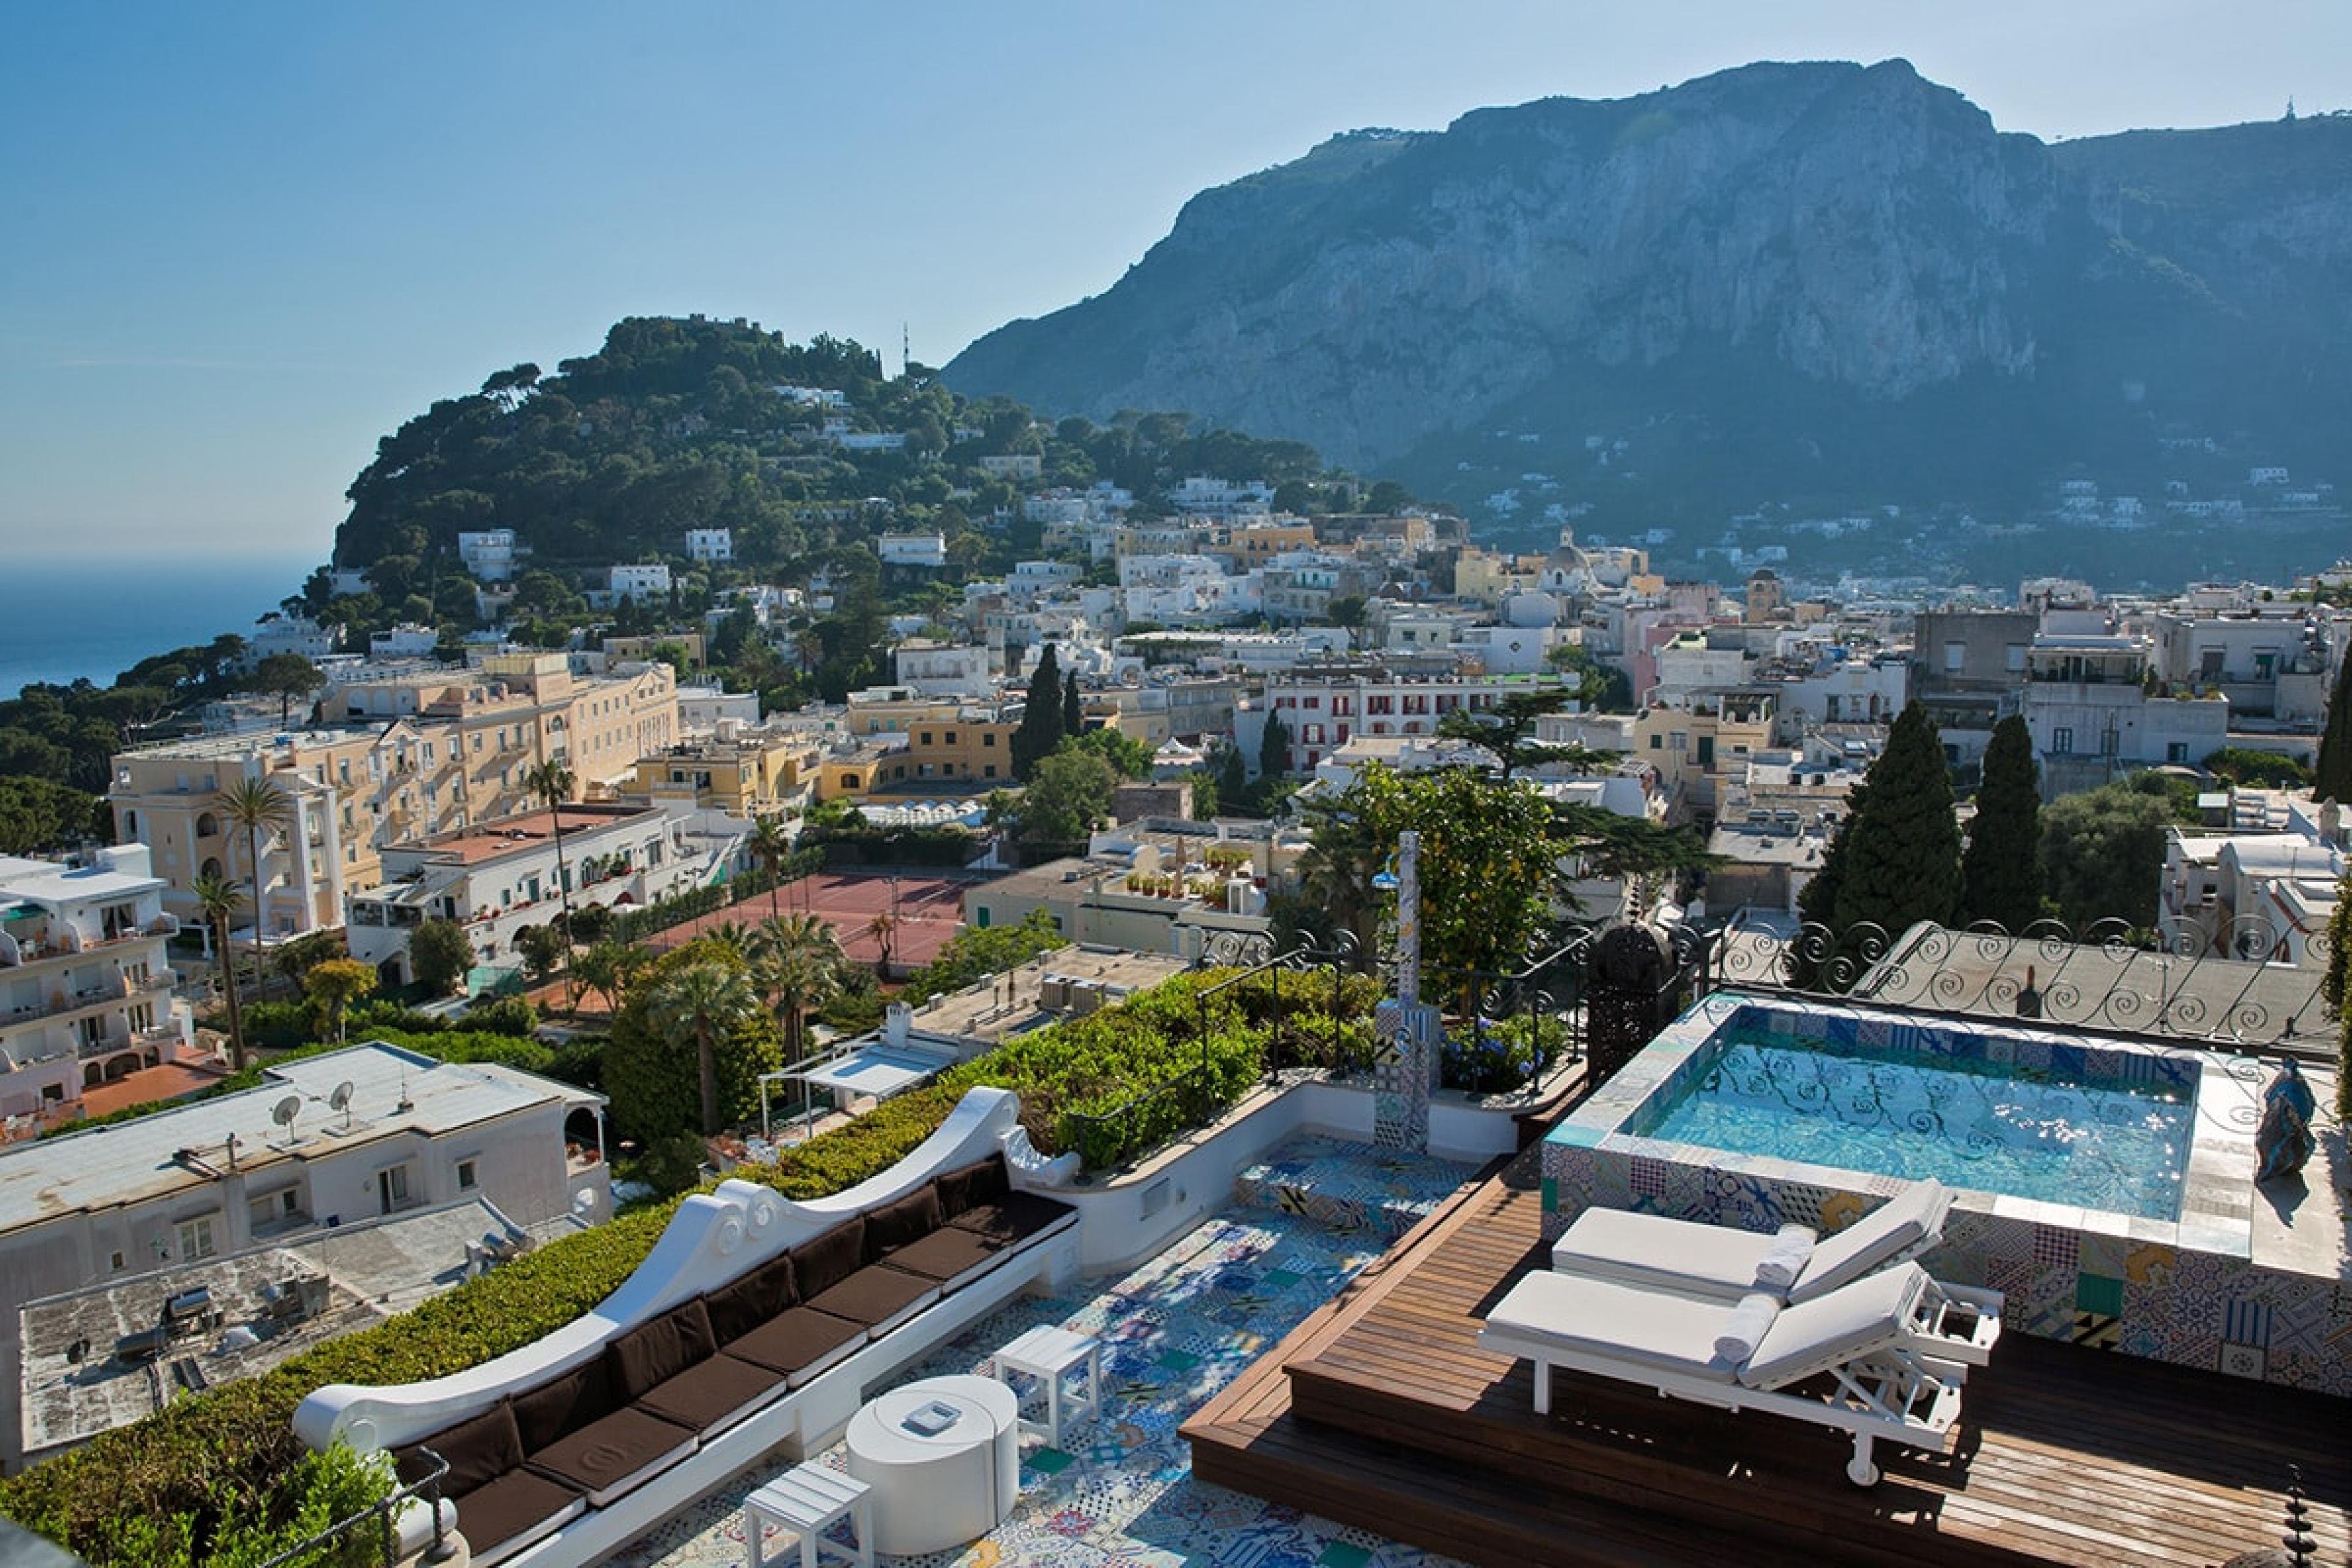 view out over wooden deck with plunge pool and views over Capri's mountains, towns and sea